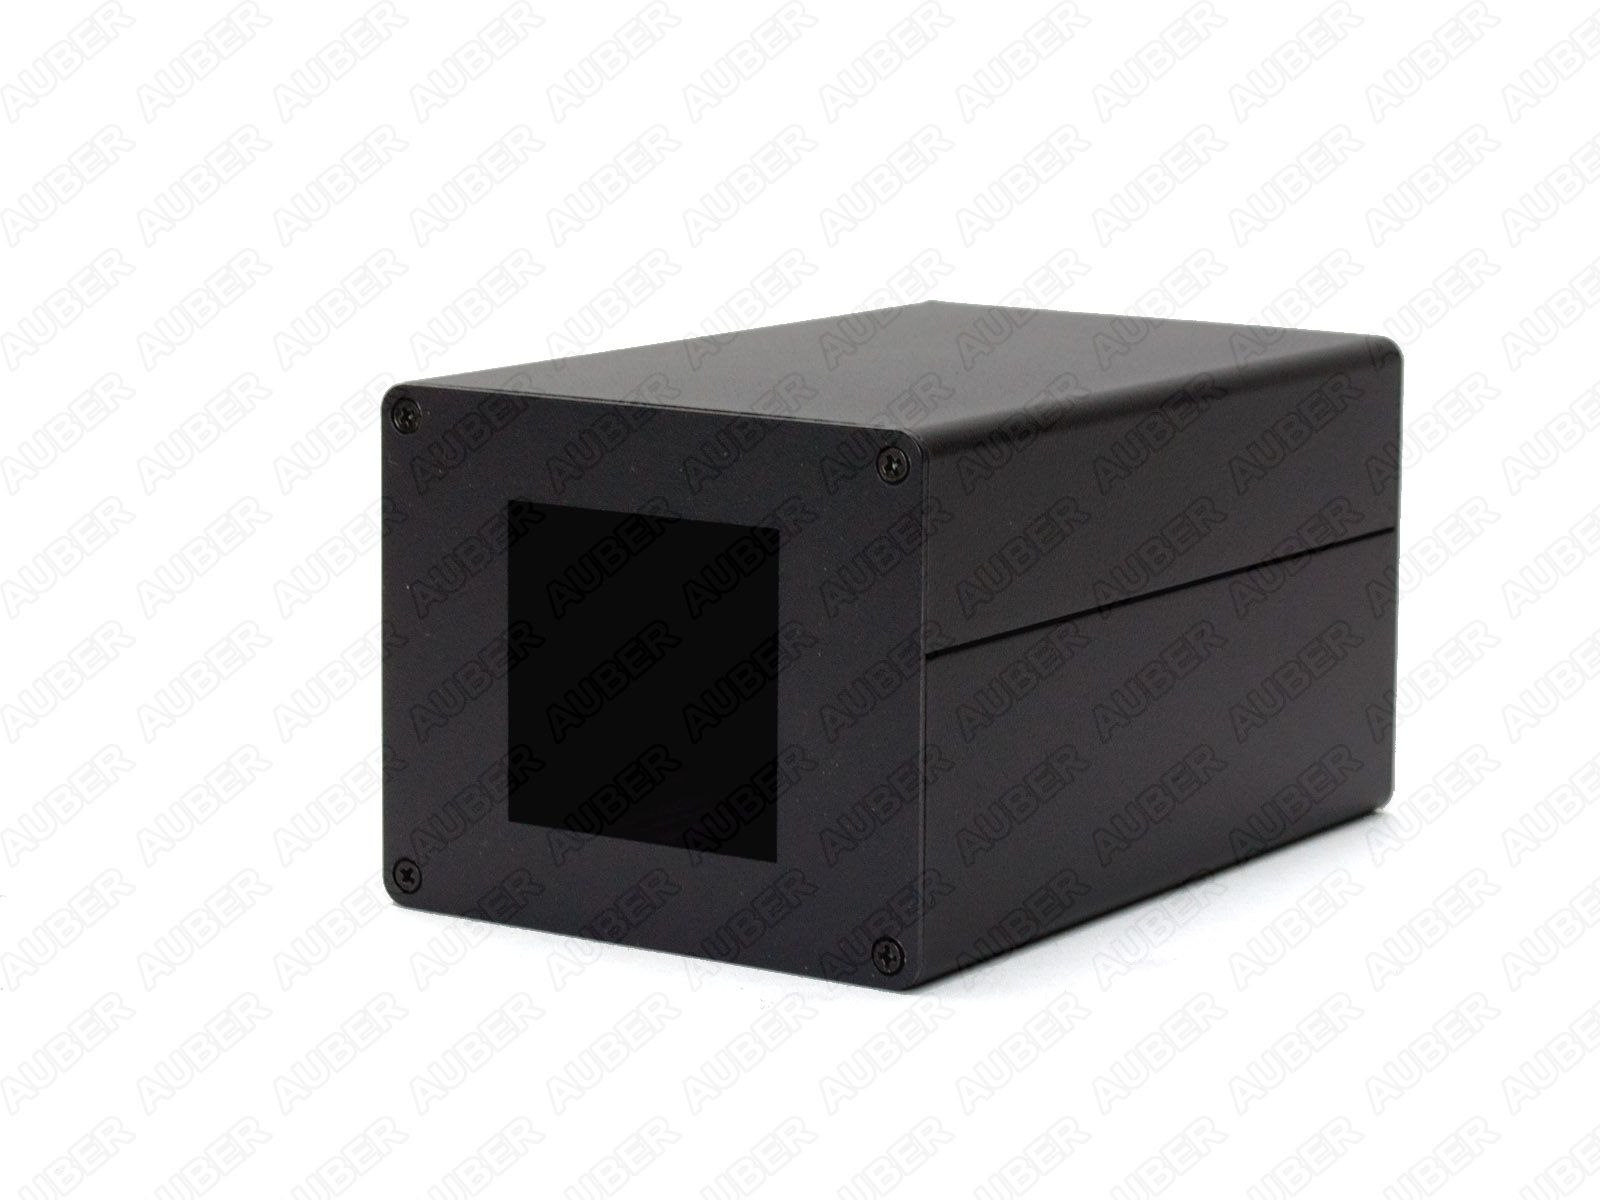 Compact Box for 1/16 DIN Gauge and Timer (Black)